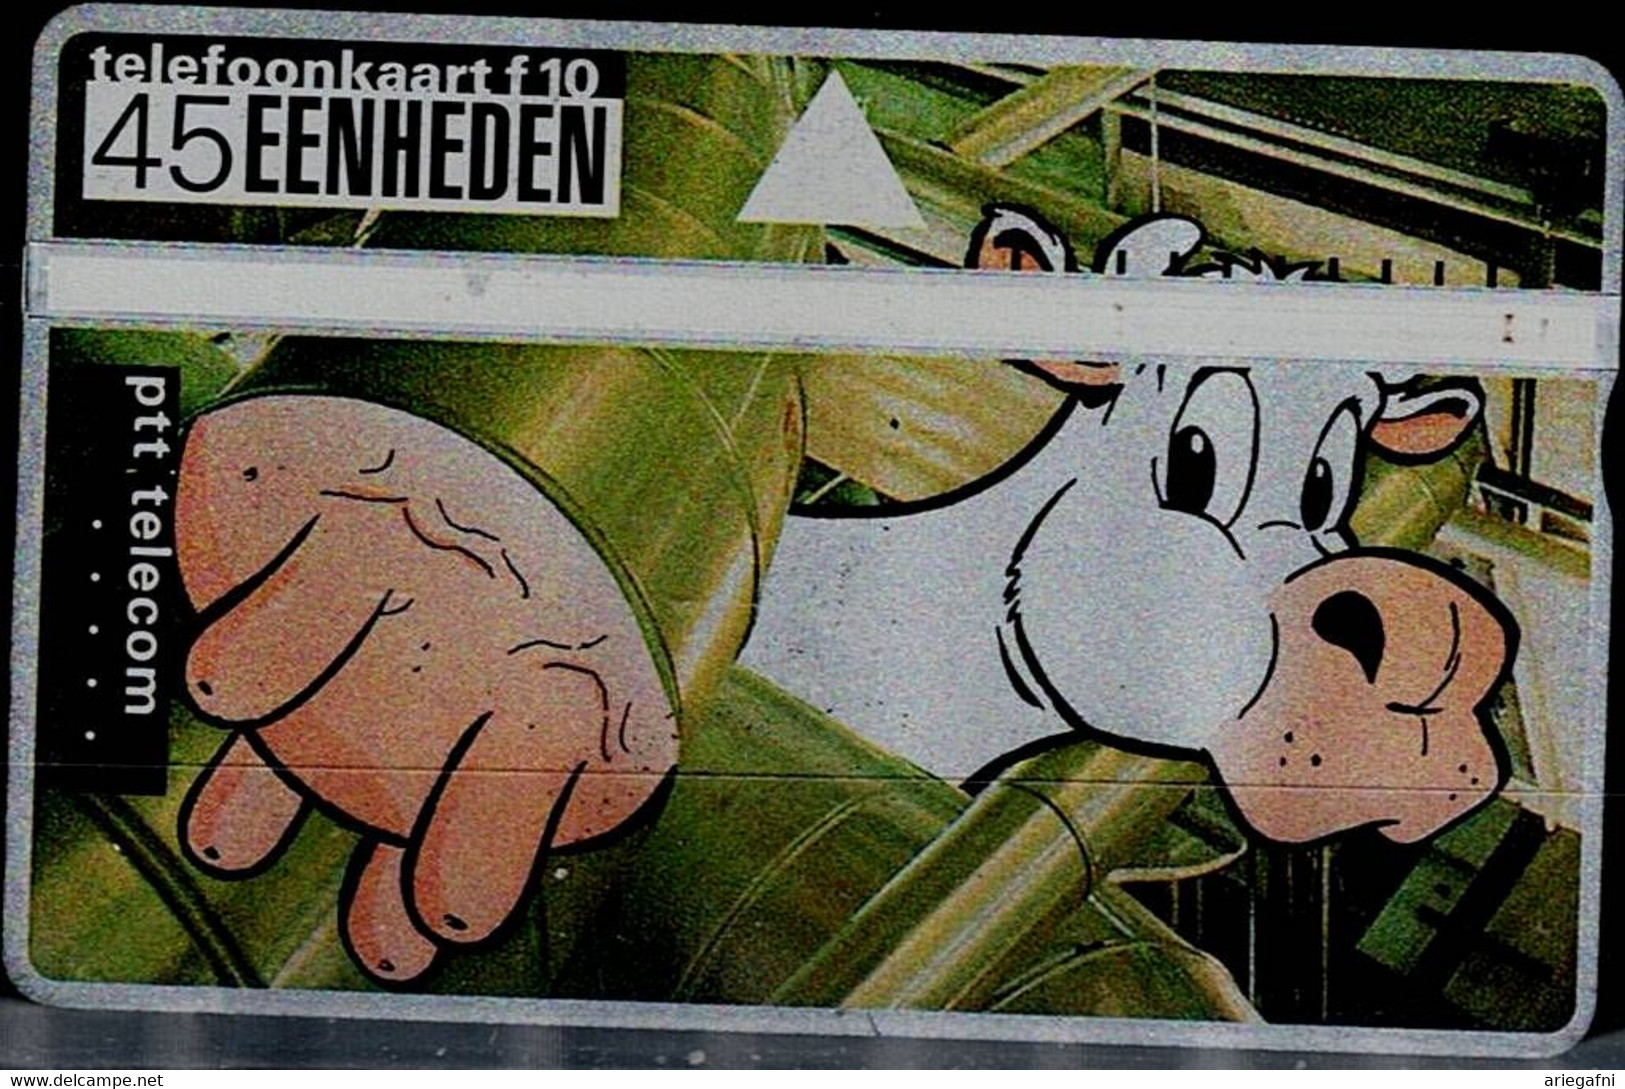 NETHERLANDS 1995 PHONECARD LOTS OF COWS, LOTS OF WORK USED VF!! - Pubbliche